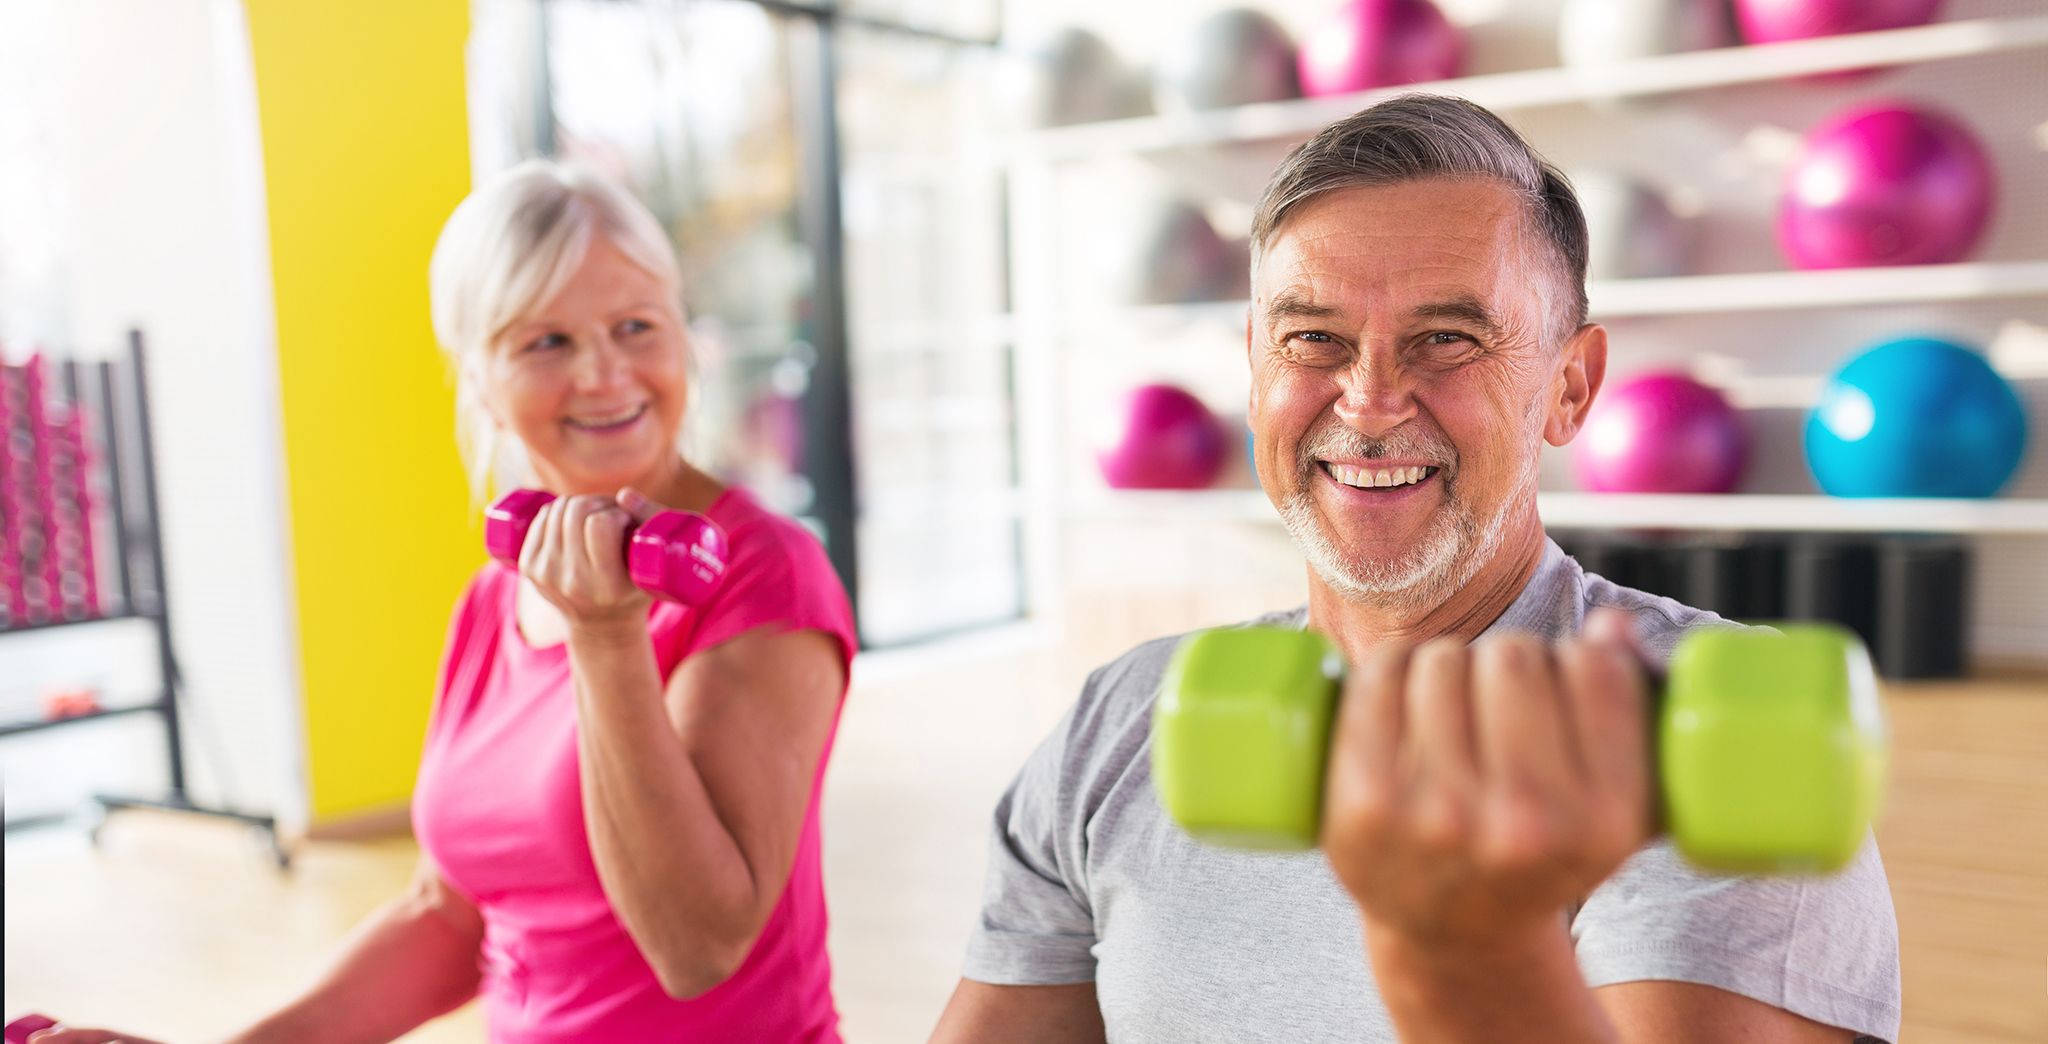 An older man and woman working out with colorful hand weights